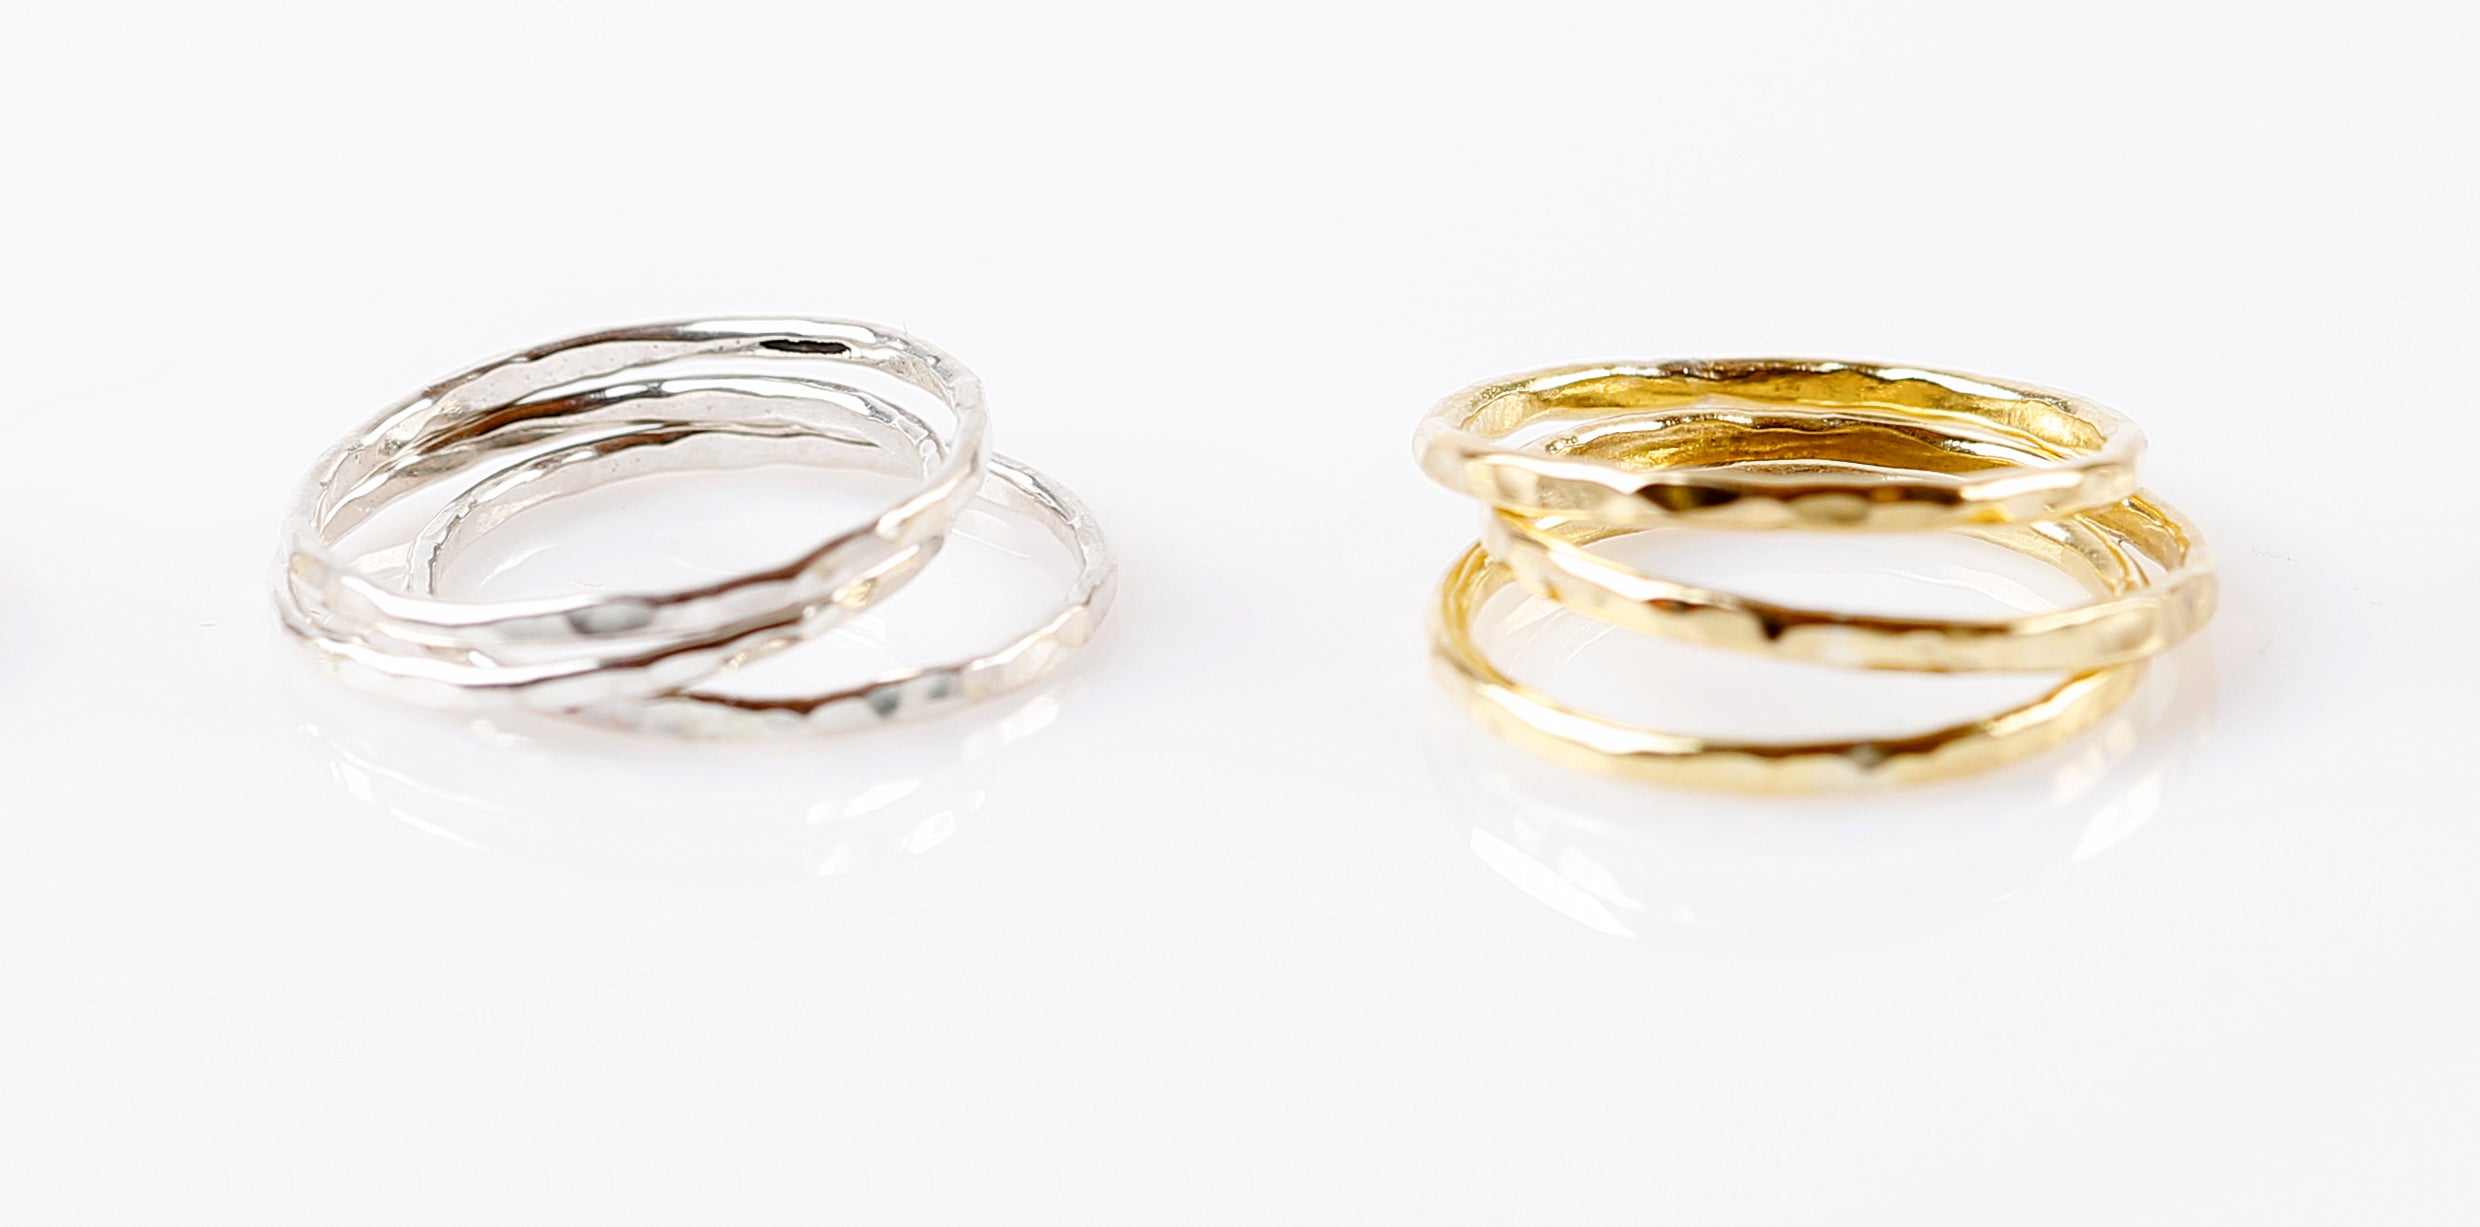 Textured Stack rings - silver - set of 3